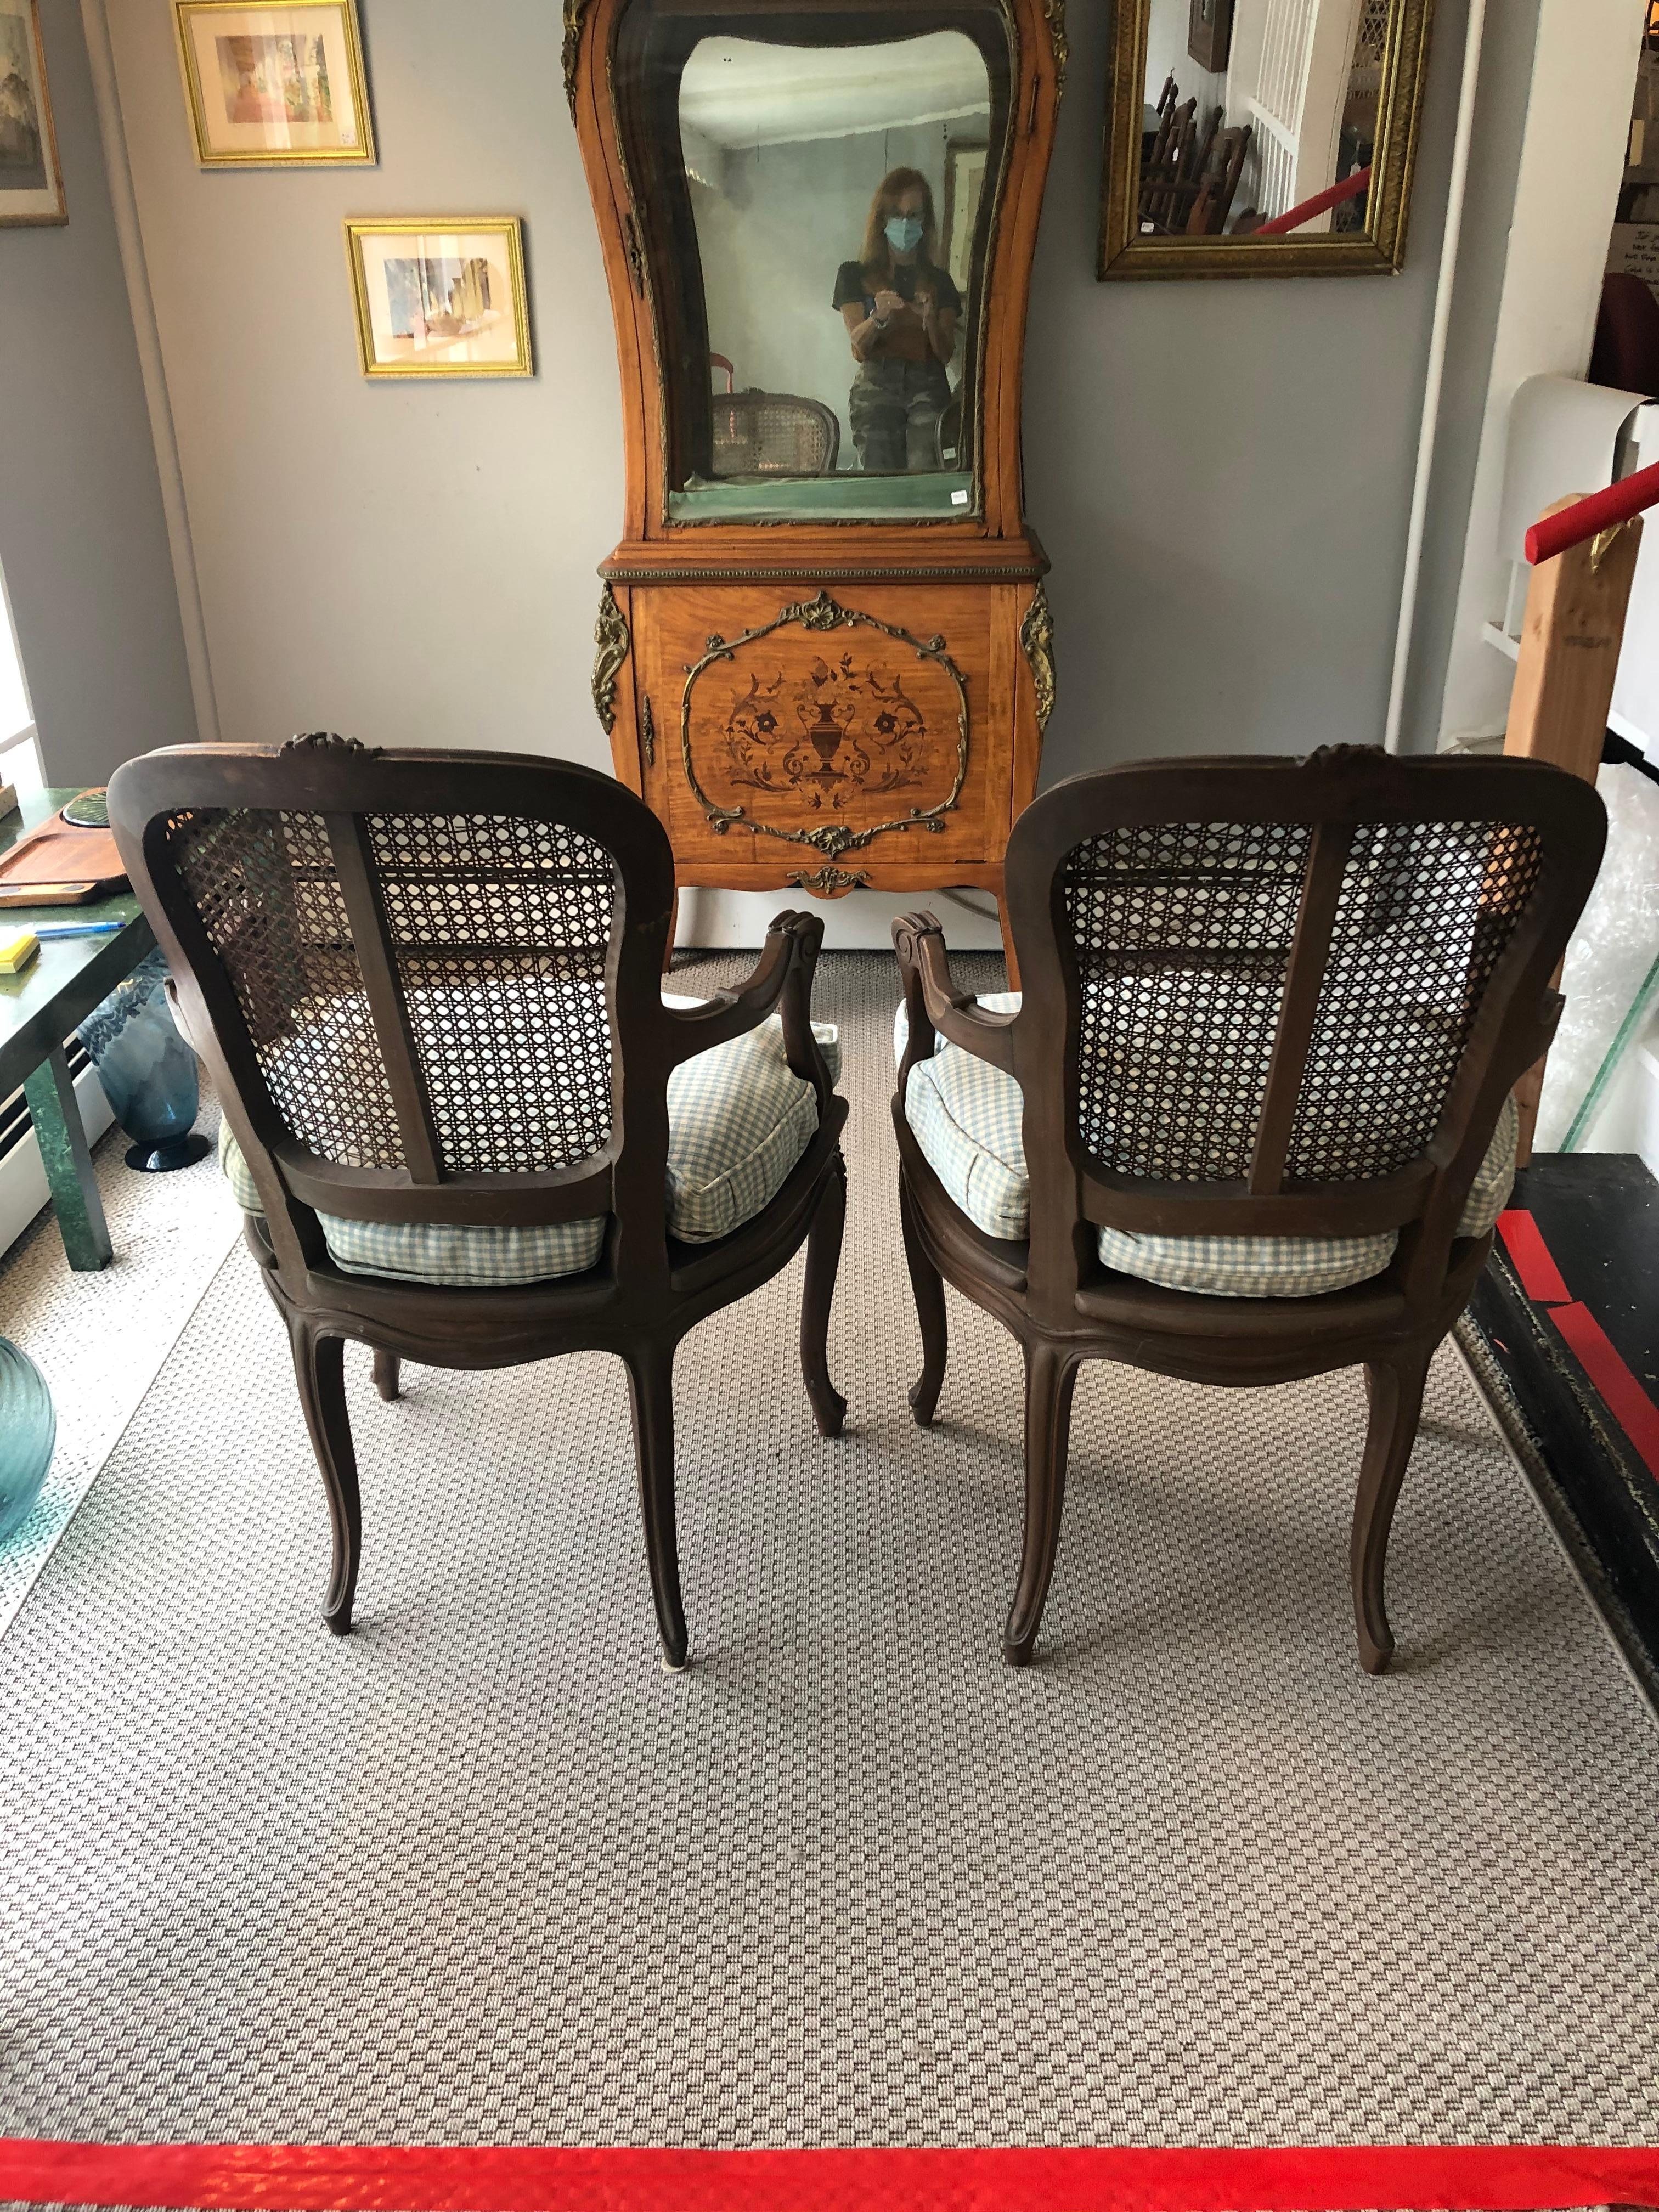 Elegant yet casual pair of comfy French carved walnut armchairs having caned seats and backs, window pane back, and custom light blue and white checked down filled seat cushions. Would work well at each end of a dining table.
Measures: Arm height